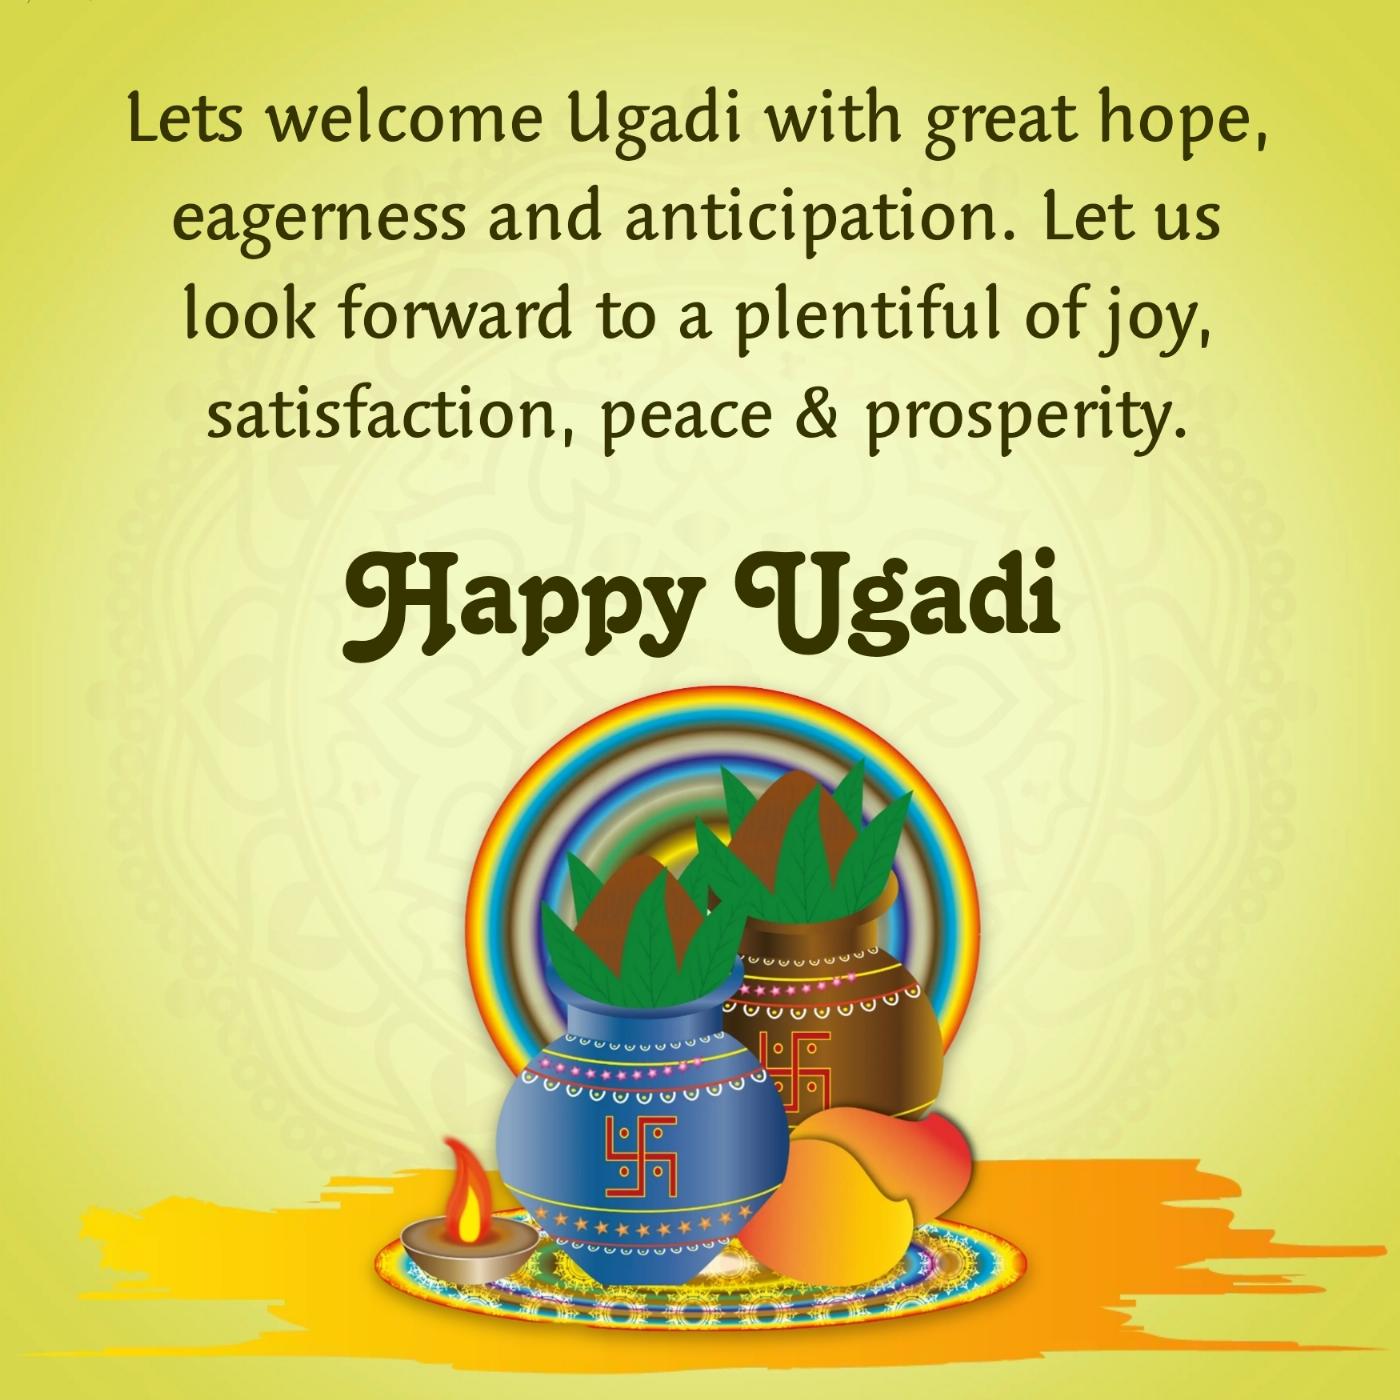 Lets welcome Ugadi with great hope eagerness